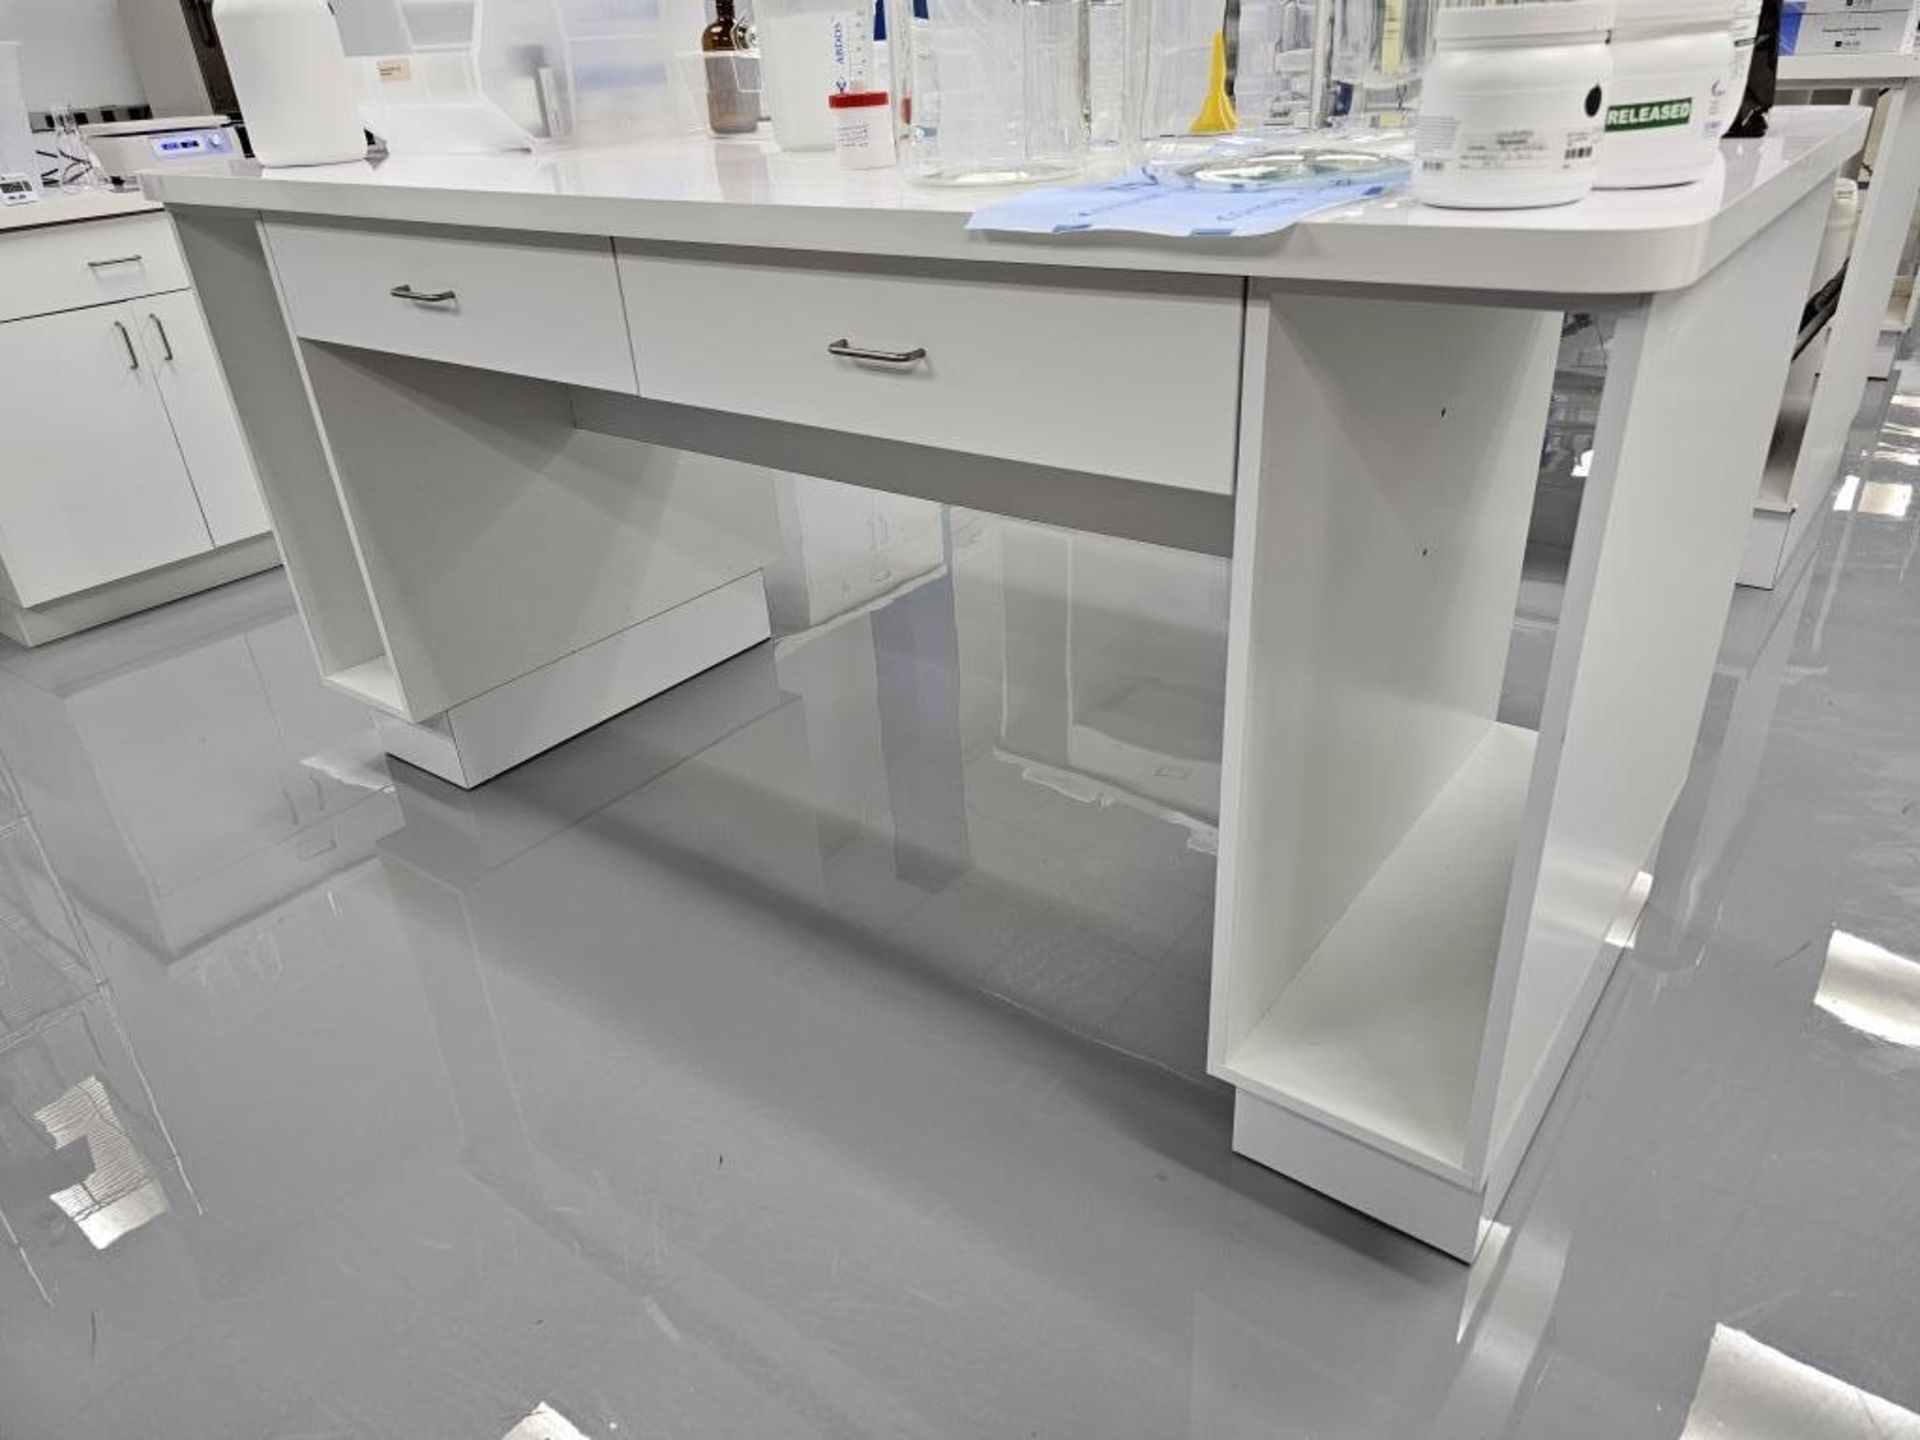 (3) 82" x 38" x 40.5" Double Sided Lab Bench With Drawers and Side Pass Through Storage Areas - Image 5 of 6